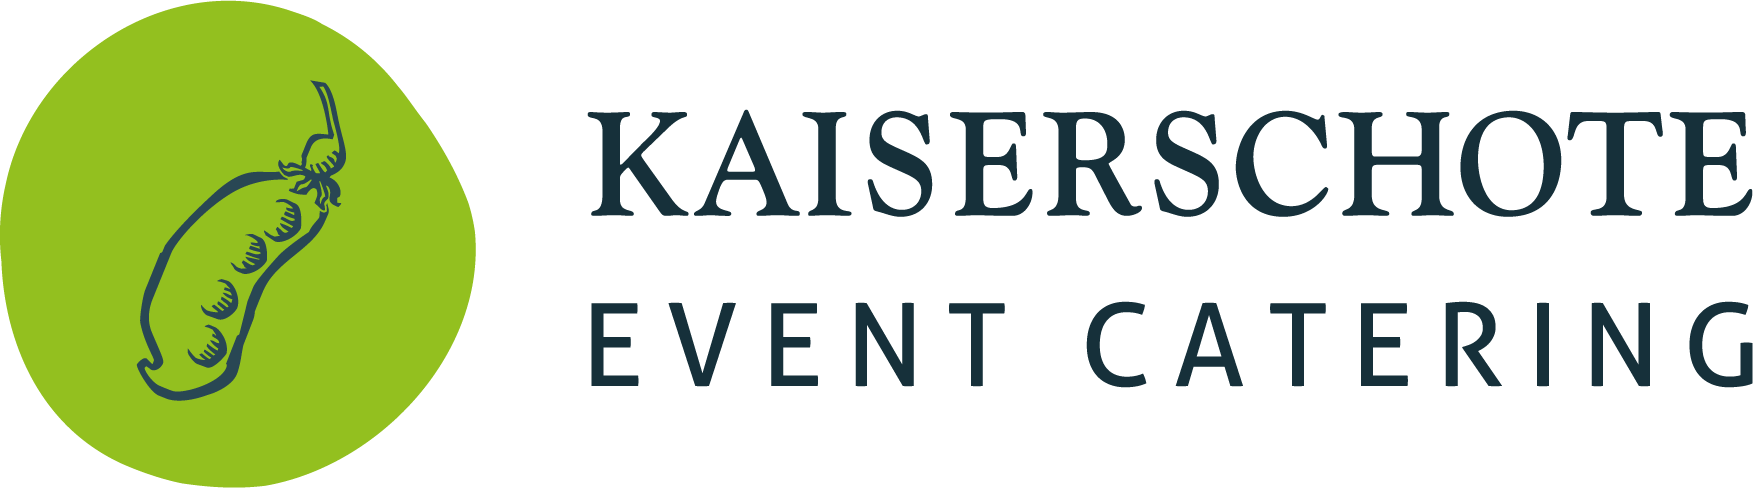 Kaiserschote Event Catering